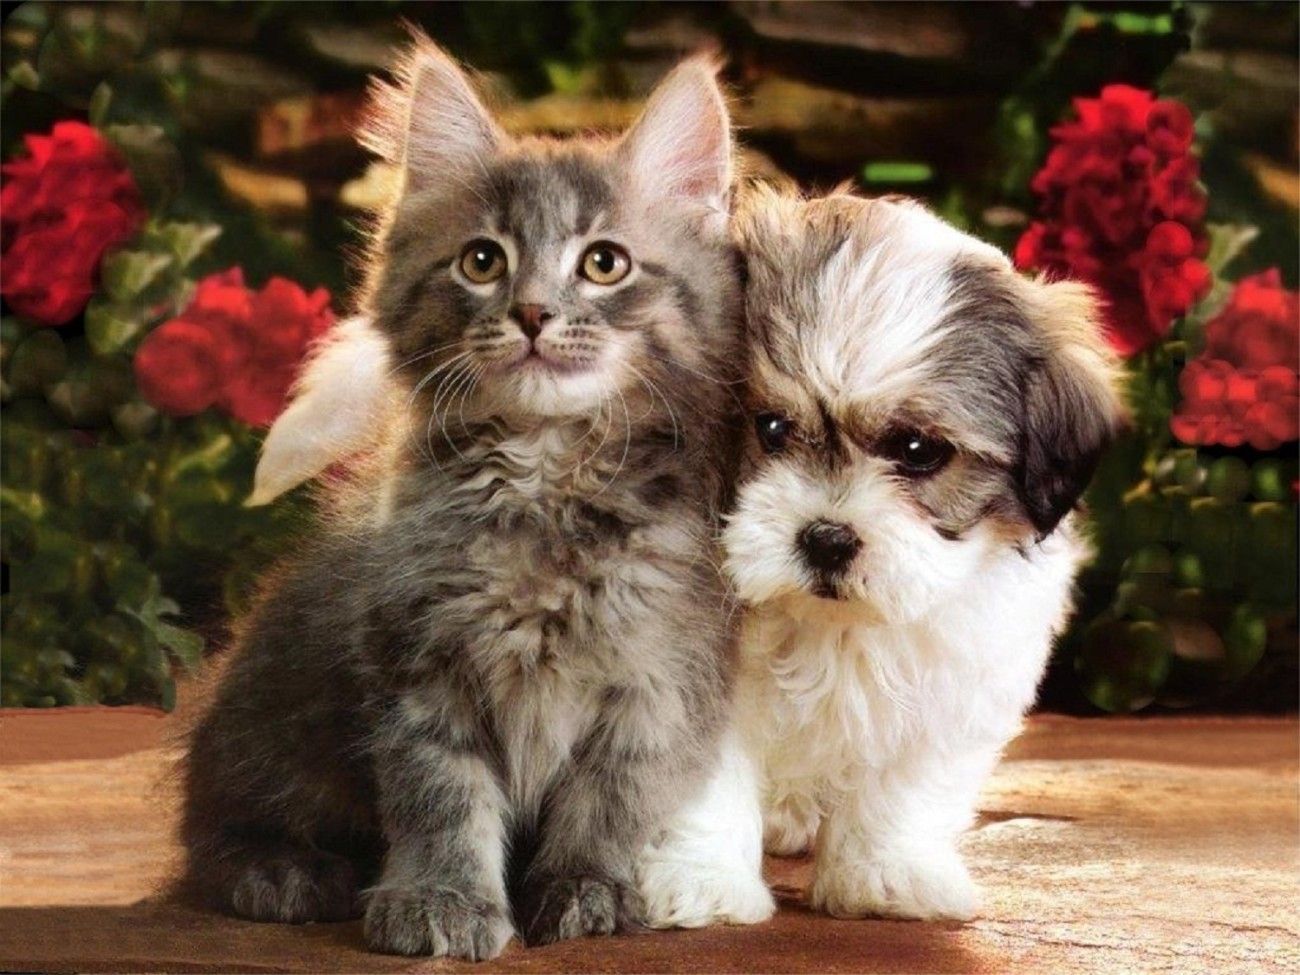 Puppies and Kitten Wallpaper. Cute puppies and kittens, Cute cats and dogs, Kittens cutest